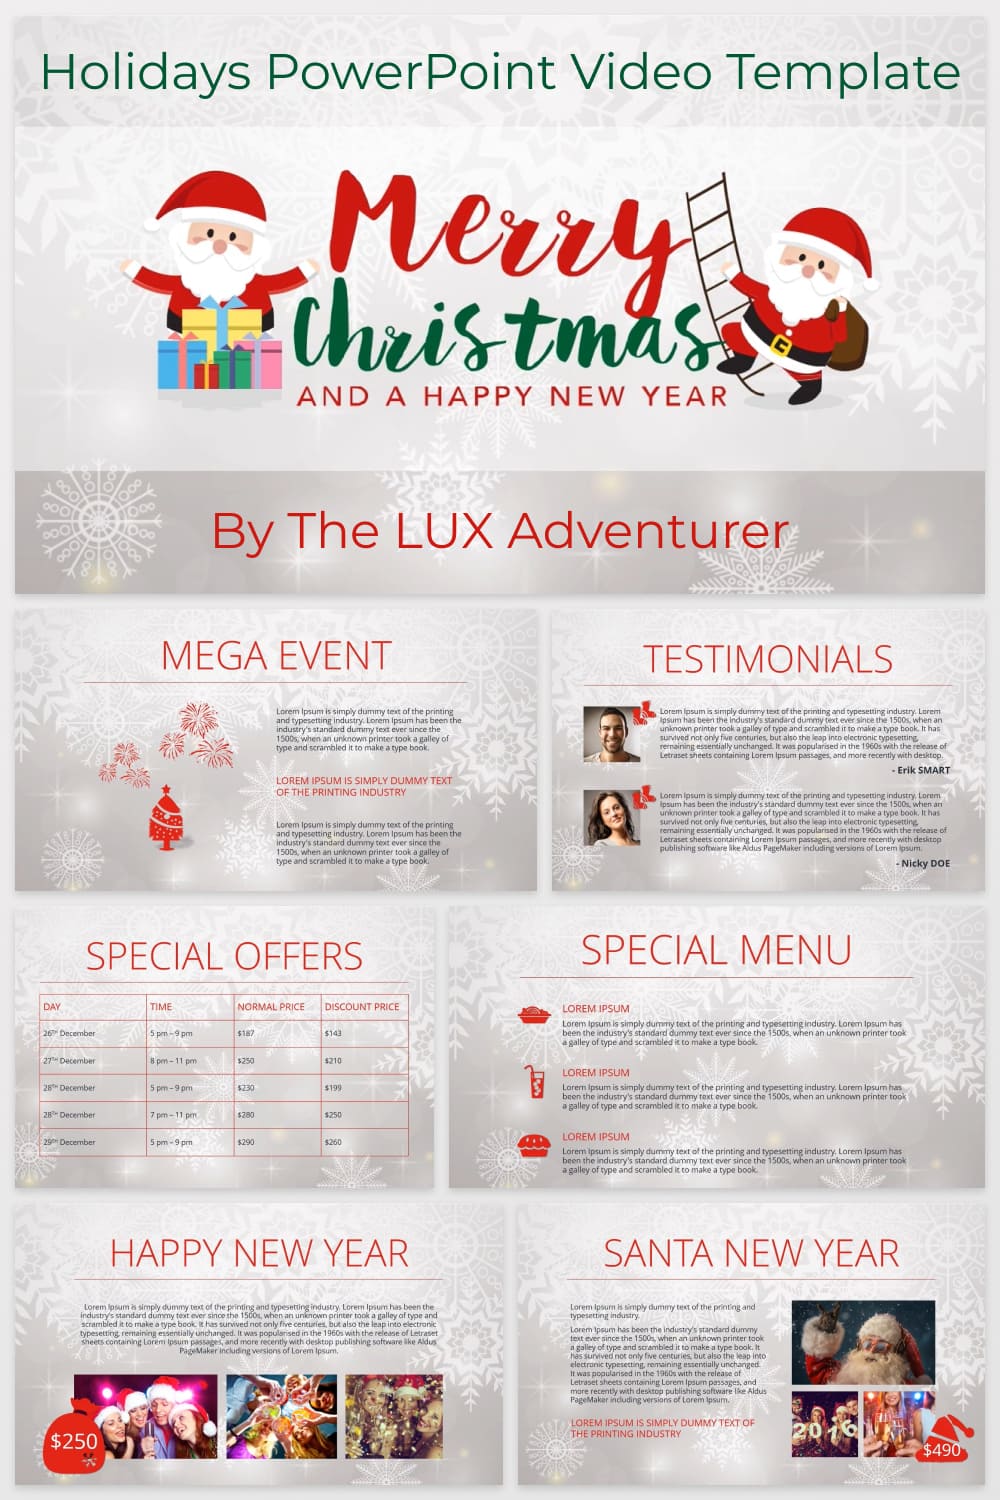 01 Holidays PowerPoint Video Template by MasterBundles Pinterest Collage Image.